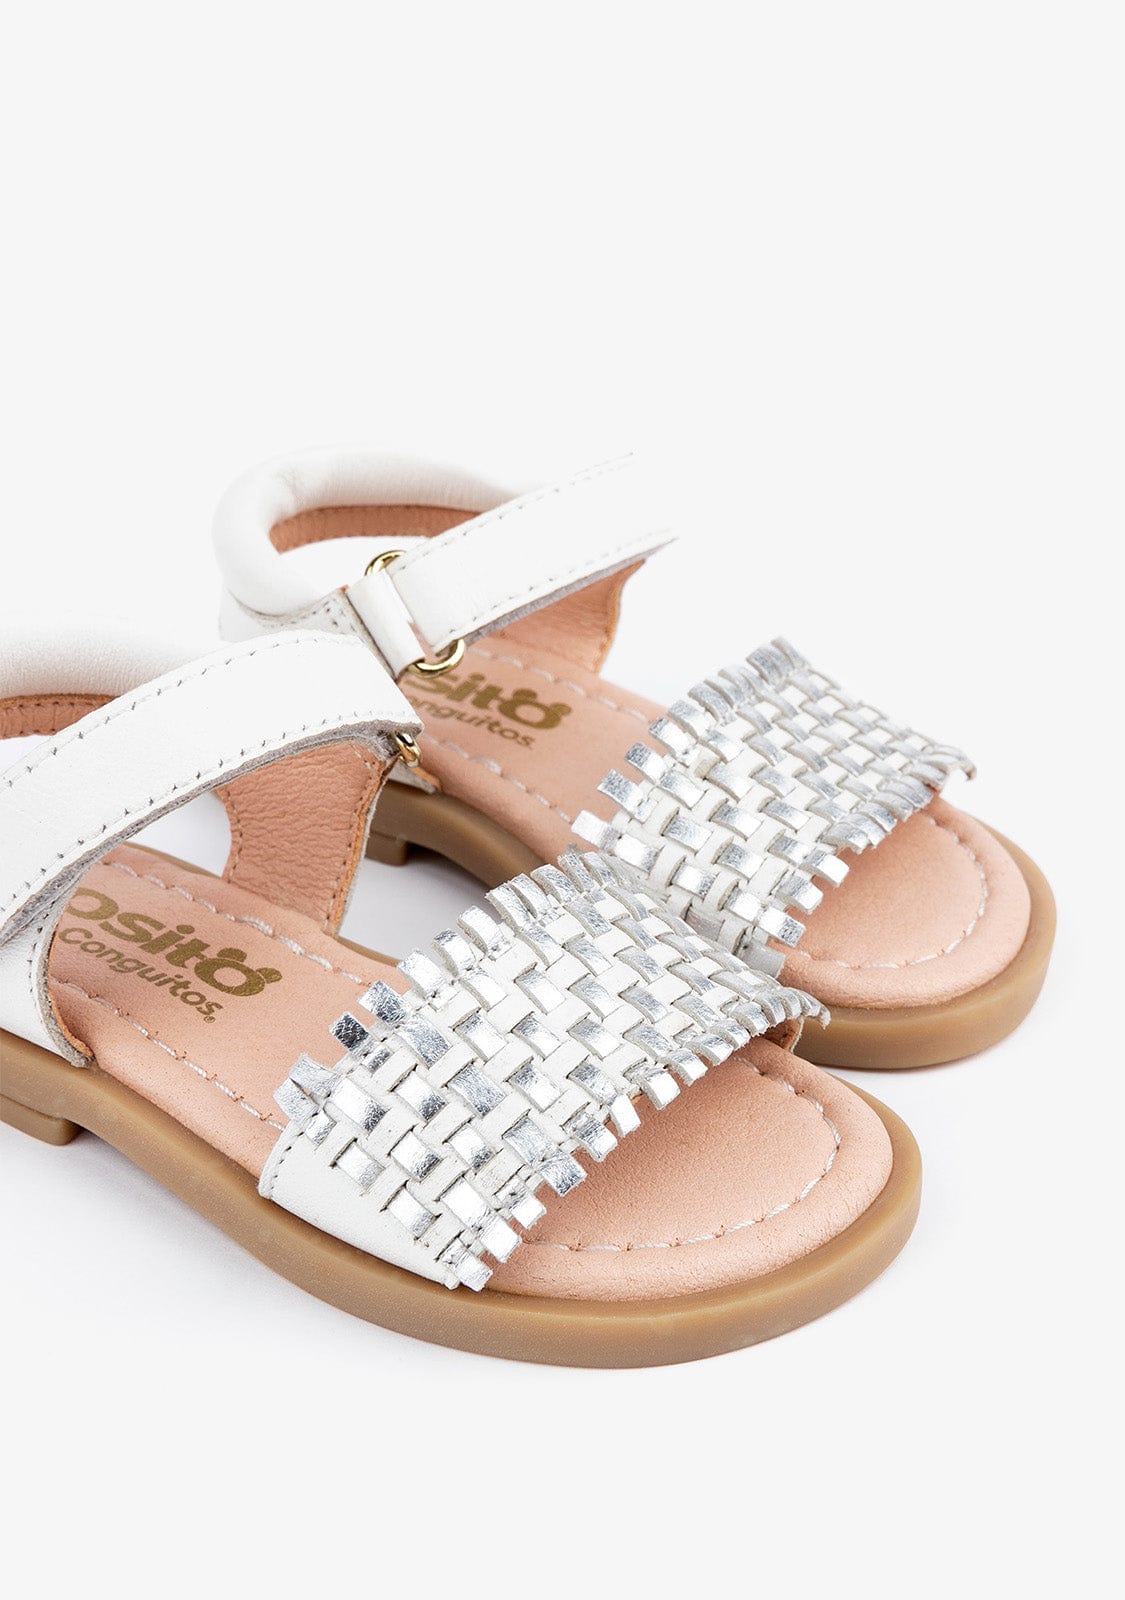 OSITO Shoes Baby's White Braided Leather Sandals